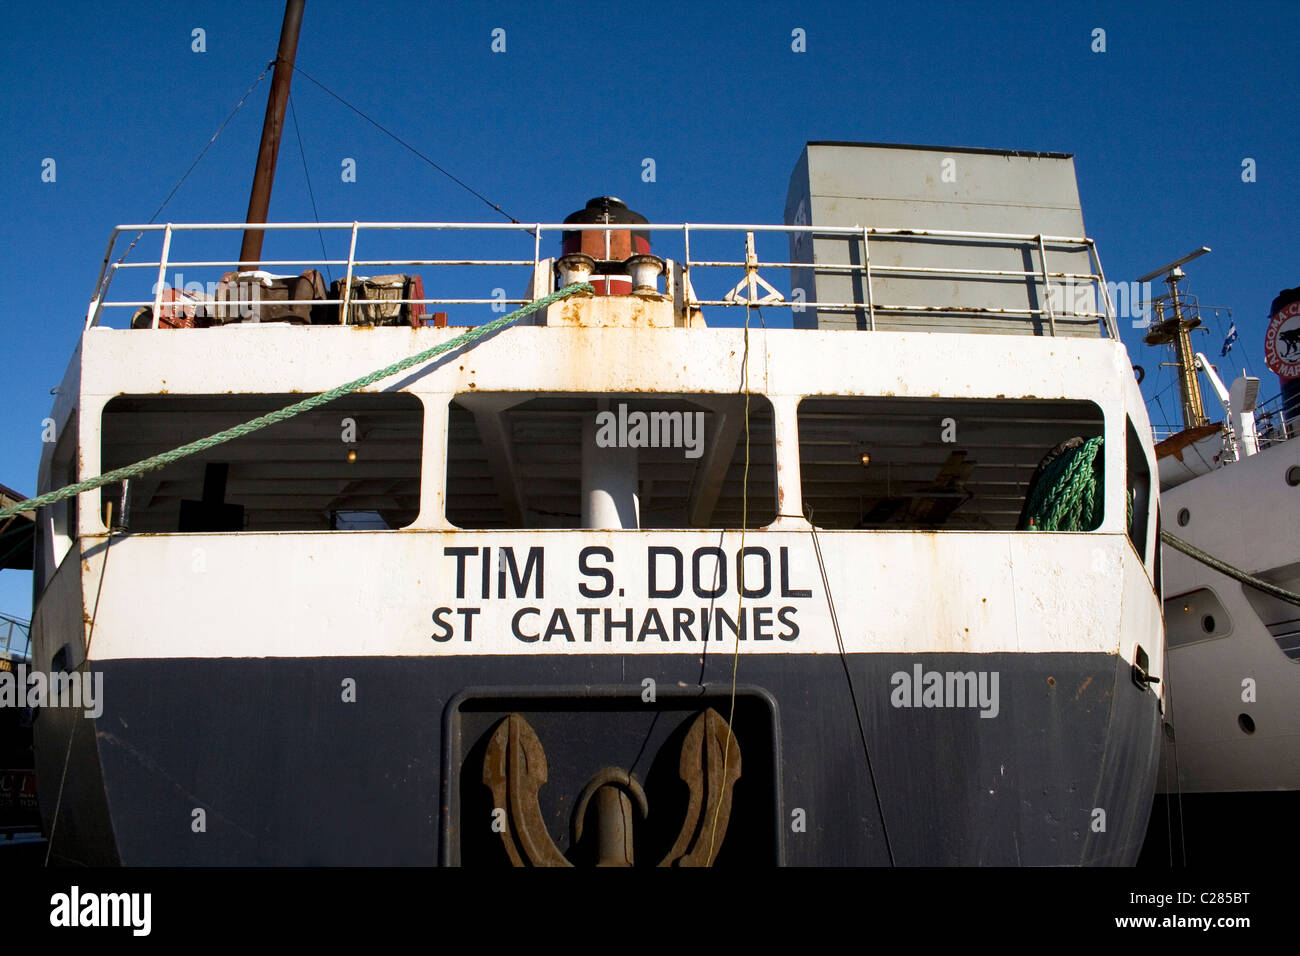 Tim S Dool, St Catherines stern of  cargo ship docked in Montreal Stock Photo